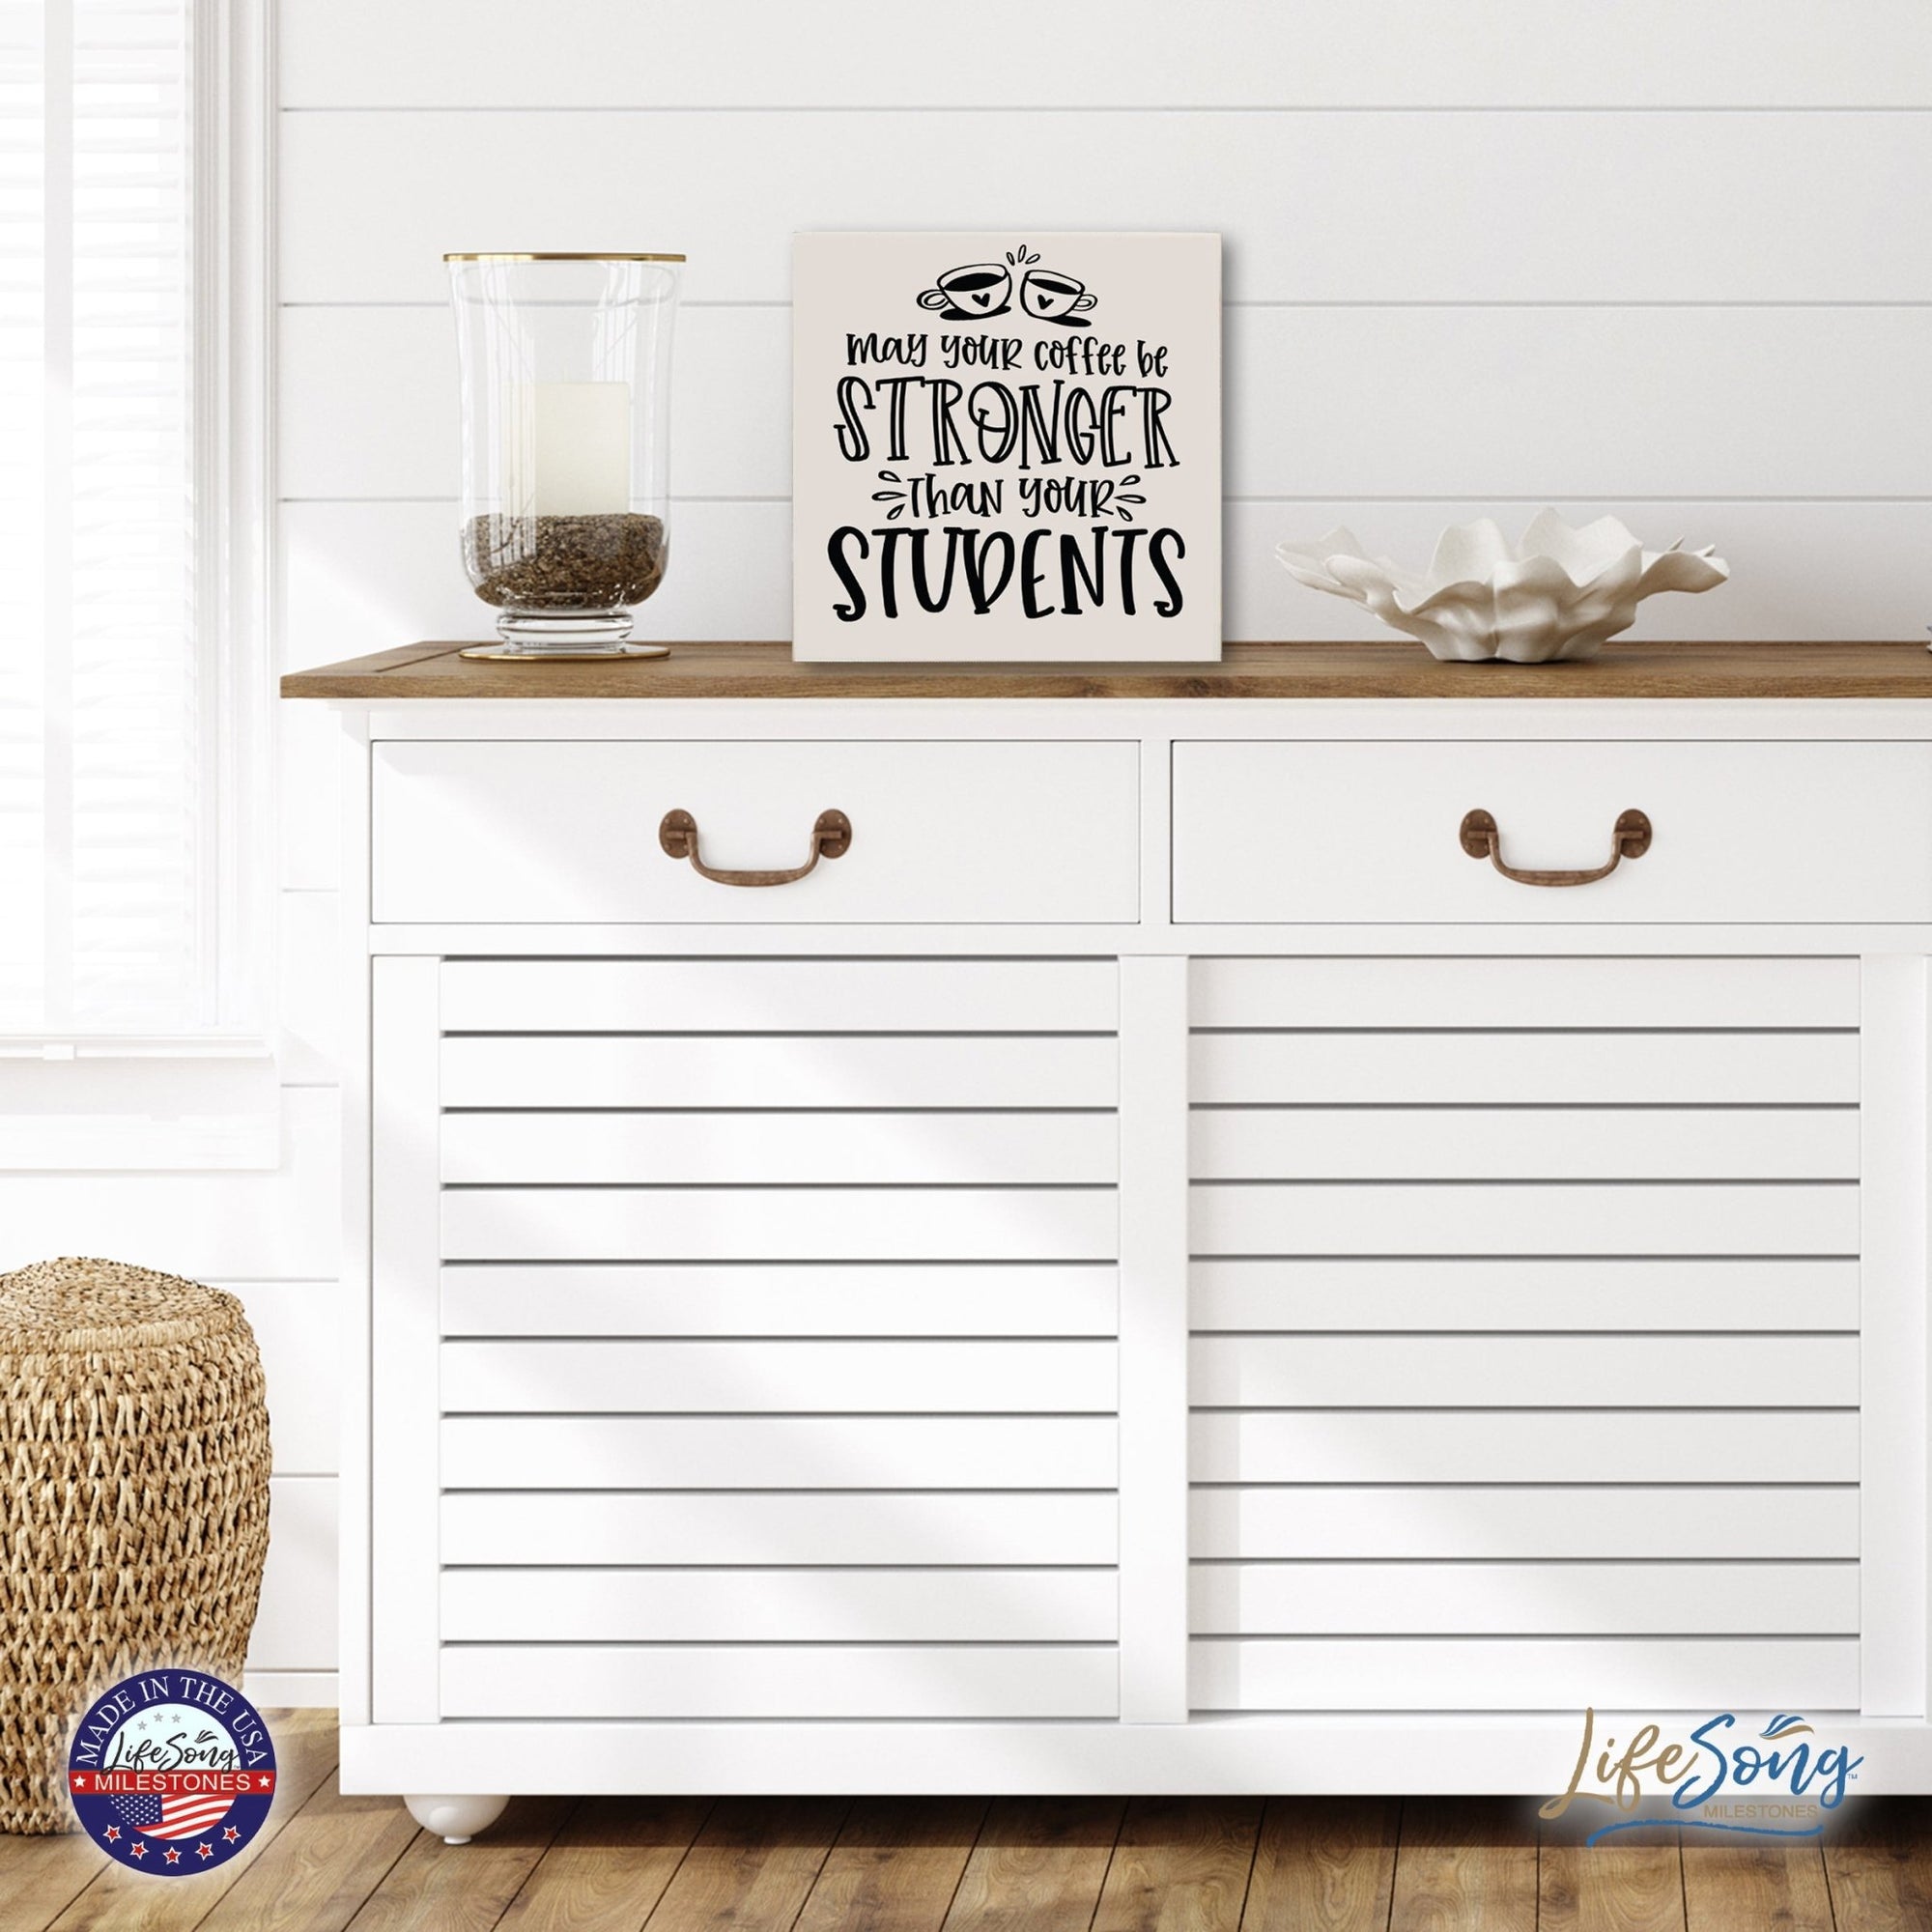 Modern Inspirational Shadow Box for Everyday Home Decorations For Teachers 6x6 - May Your Coffee Be Stronger - LifeSong Milestones